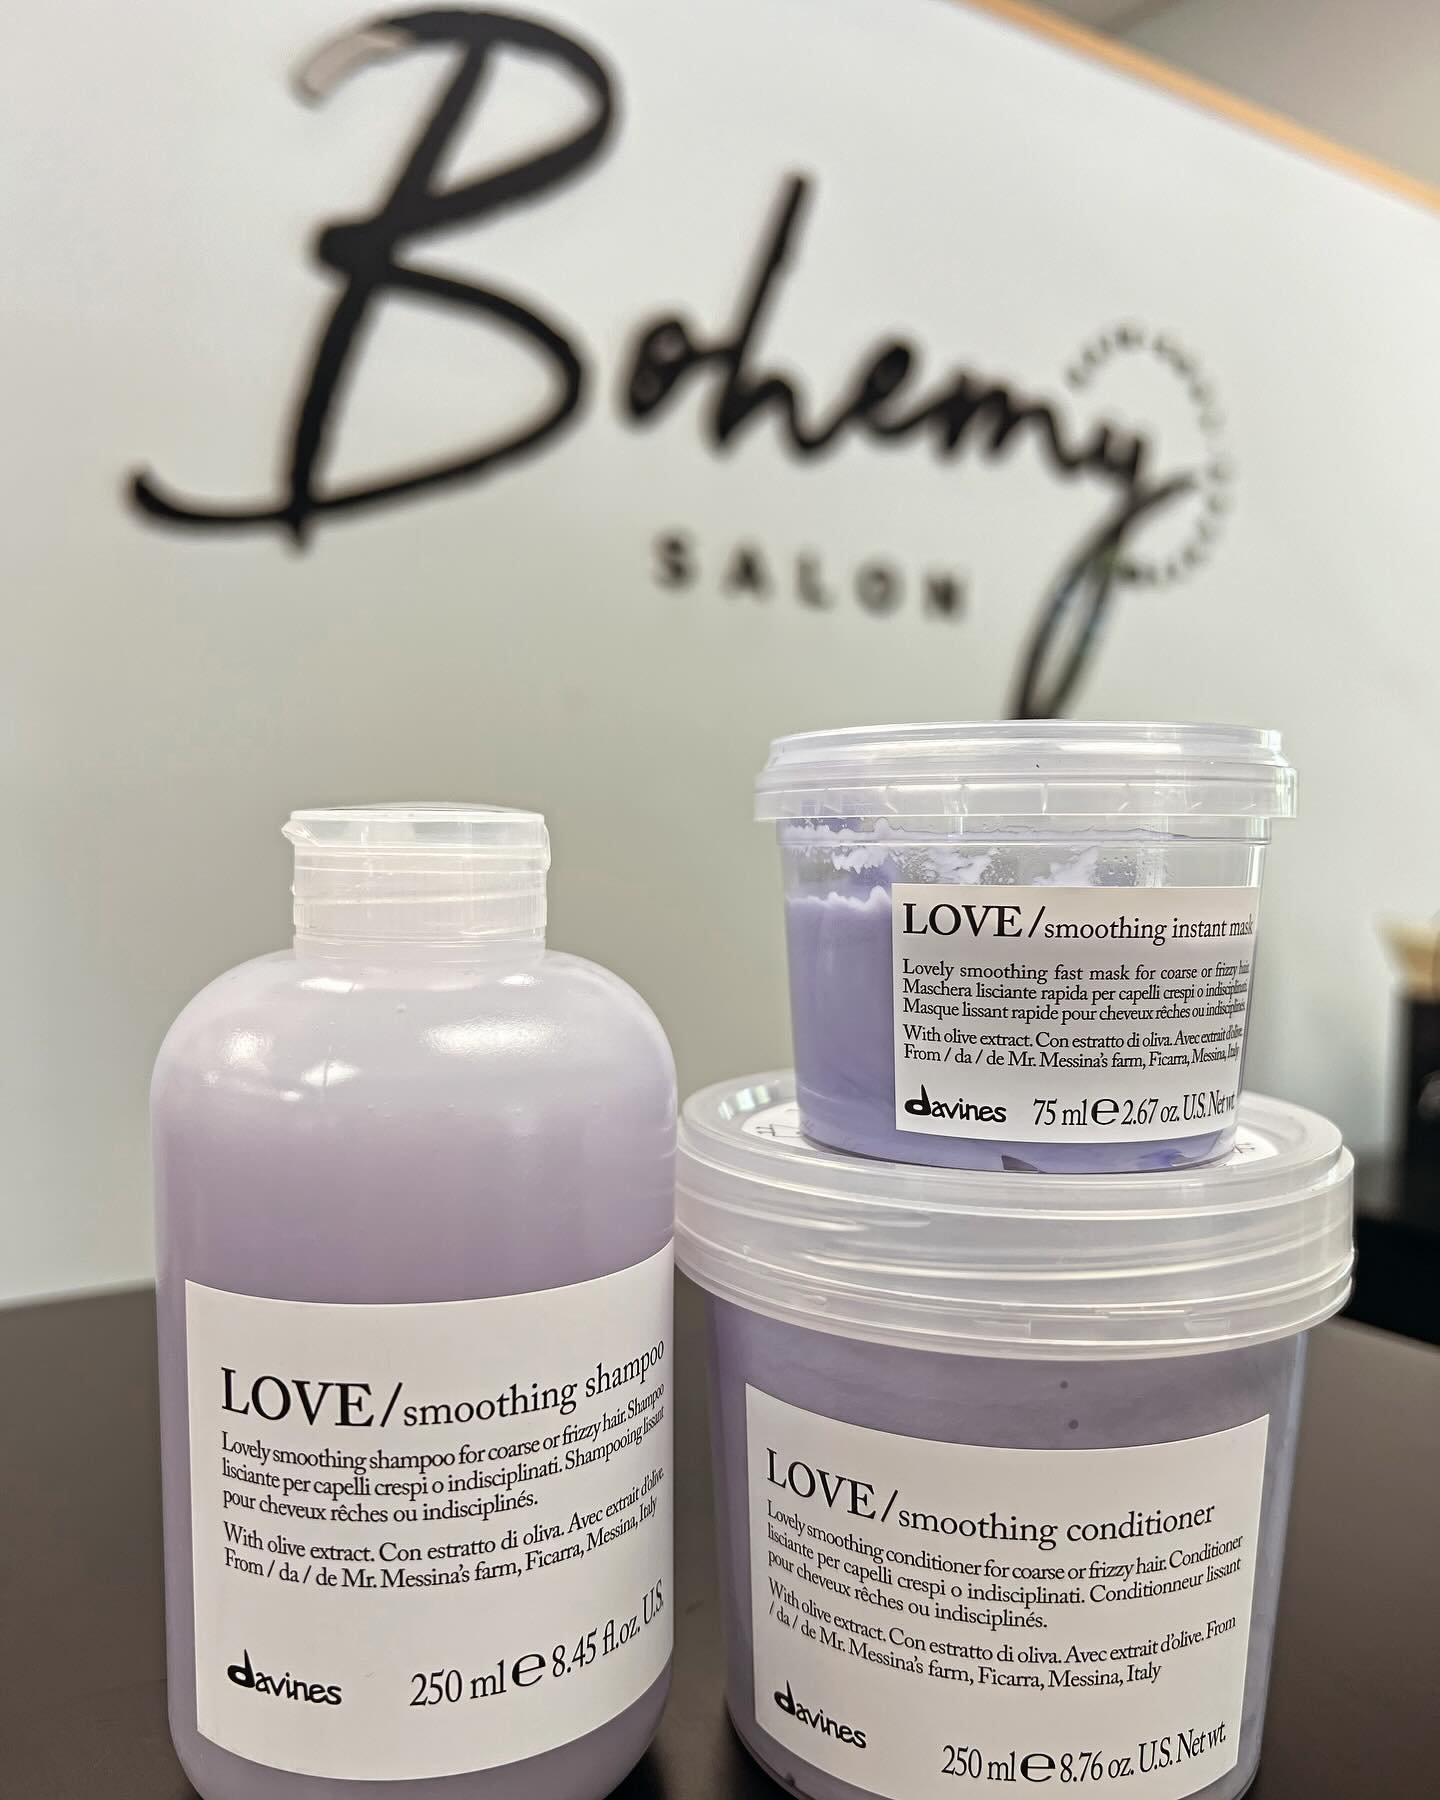 Happy Spring! 

While supplies last! Purchase 2 full size retail products receive a travel size LOVE instant smoothing mask. 

Thank you for supporting Bohemy! 

#earthmonth #davines #bcorp #lakemarysalon #spring #shopsmall #shoplocal #orlandoextensi